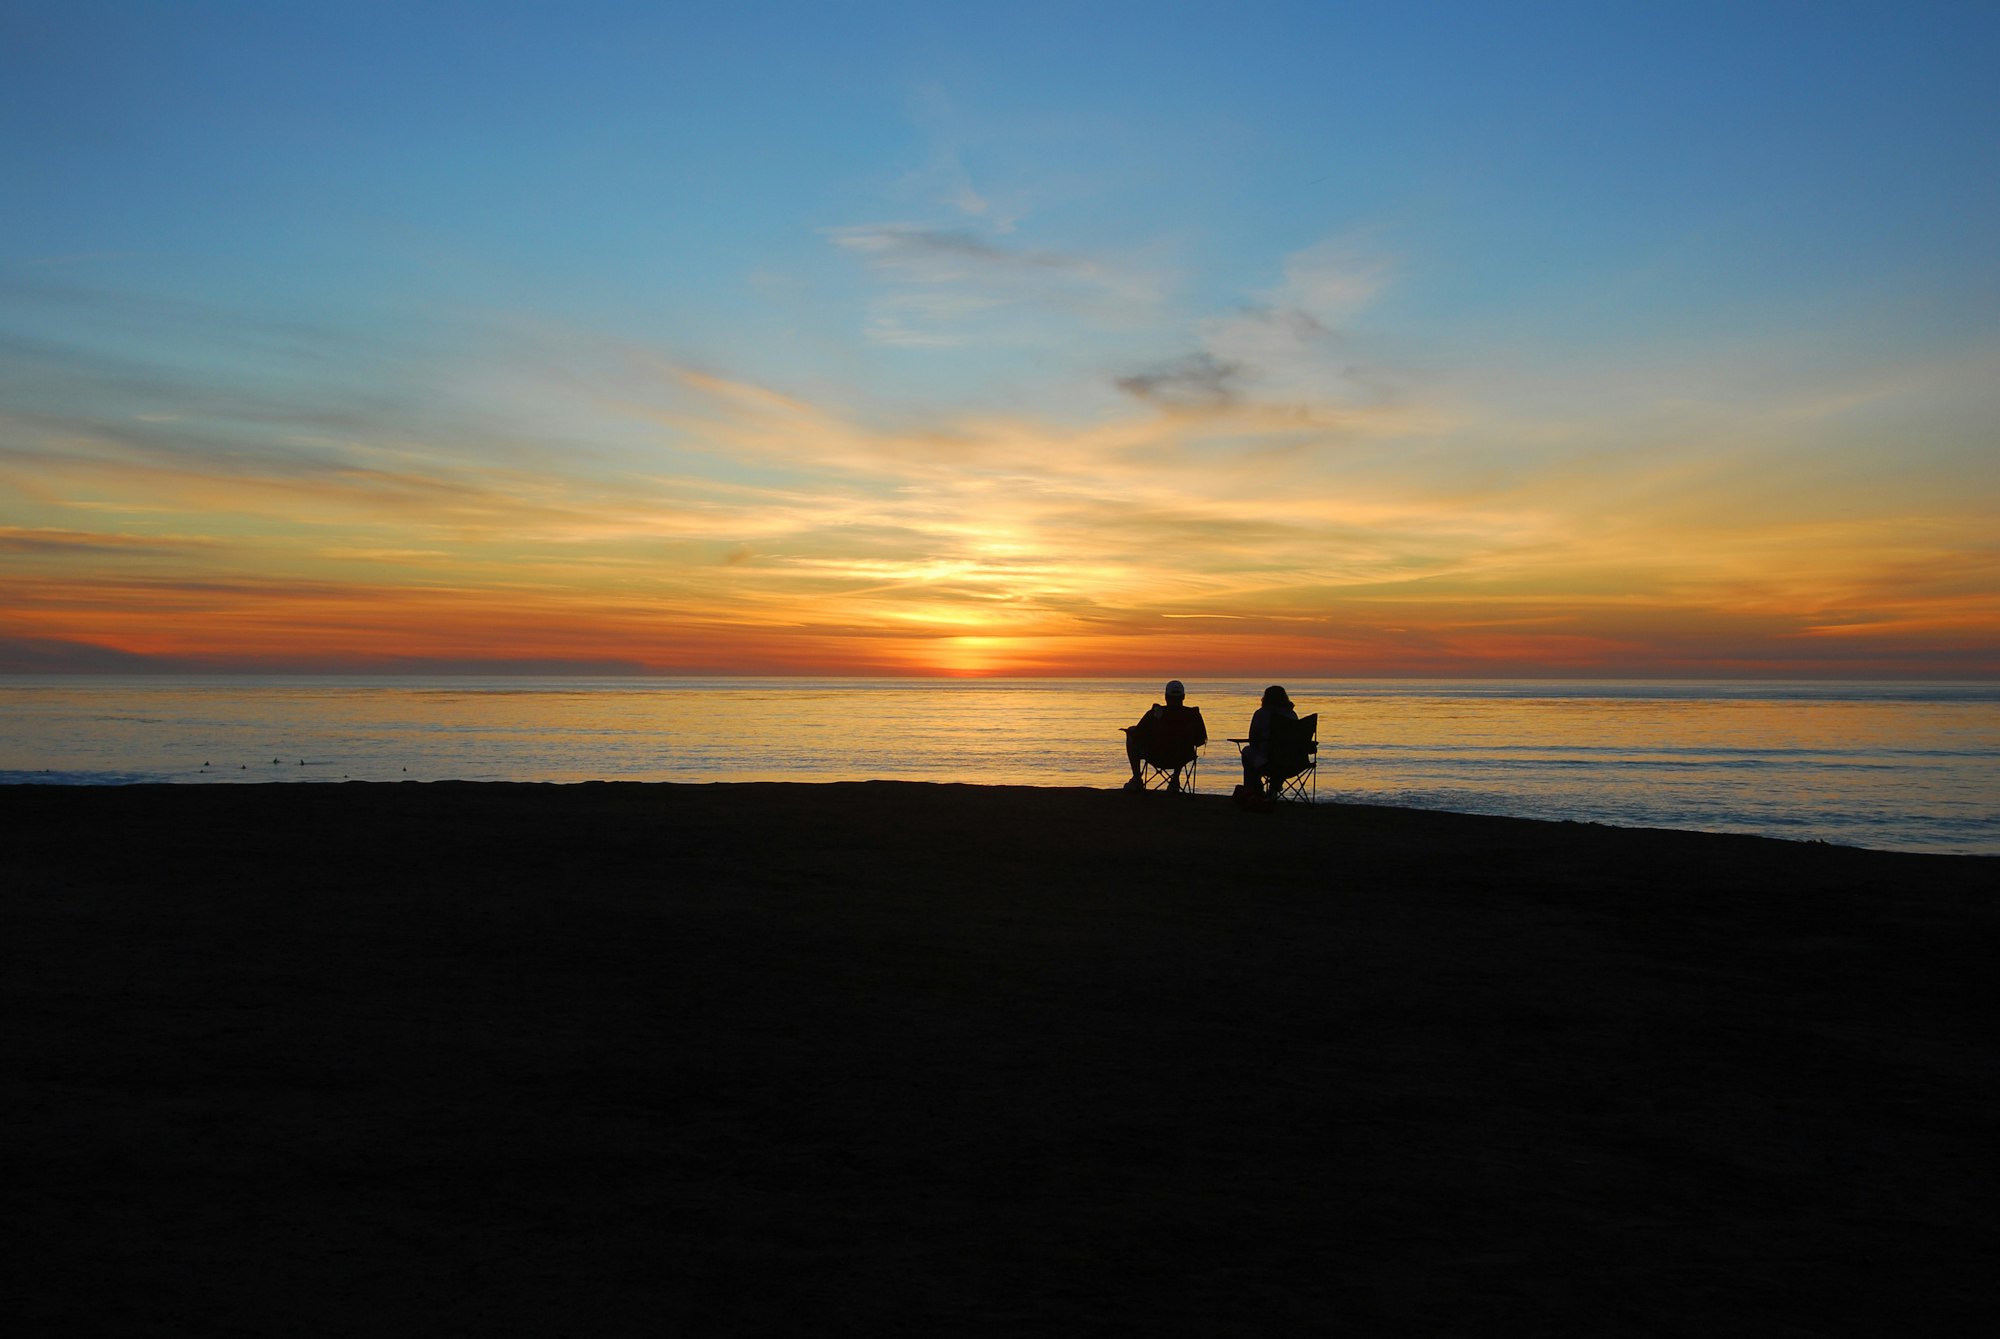 A couple sitting on benches, watching the sunset by the cliff, overlooking the ocean